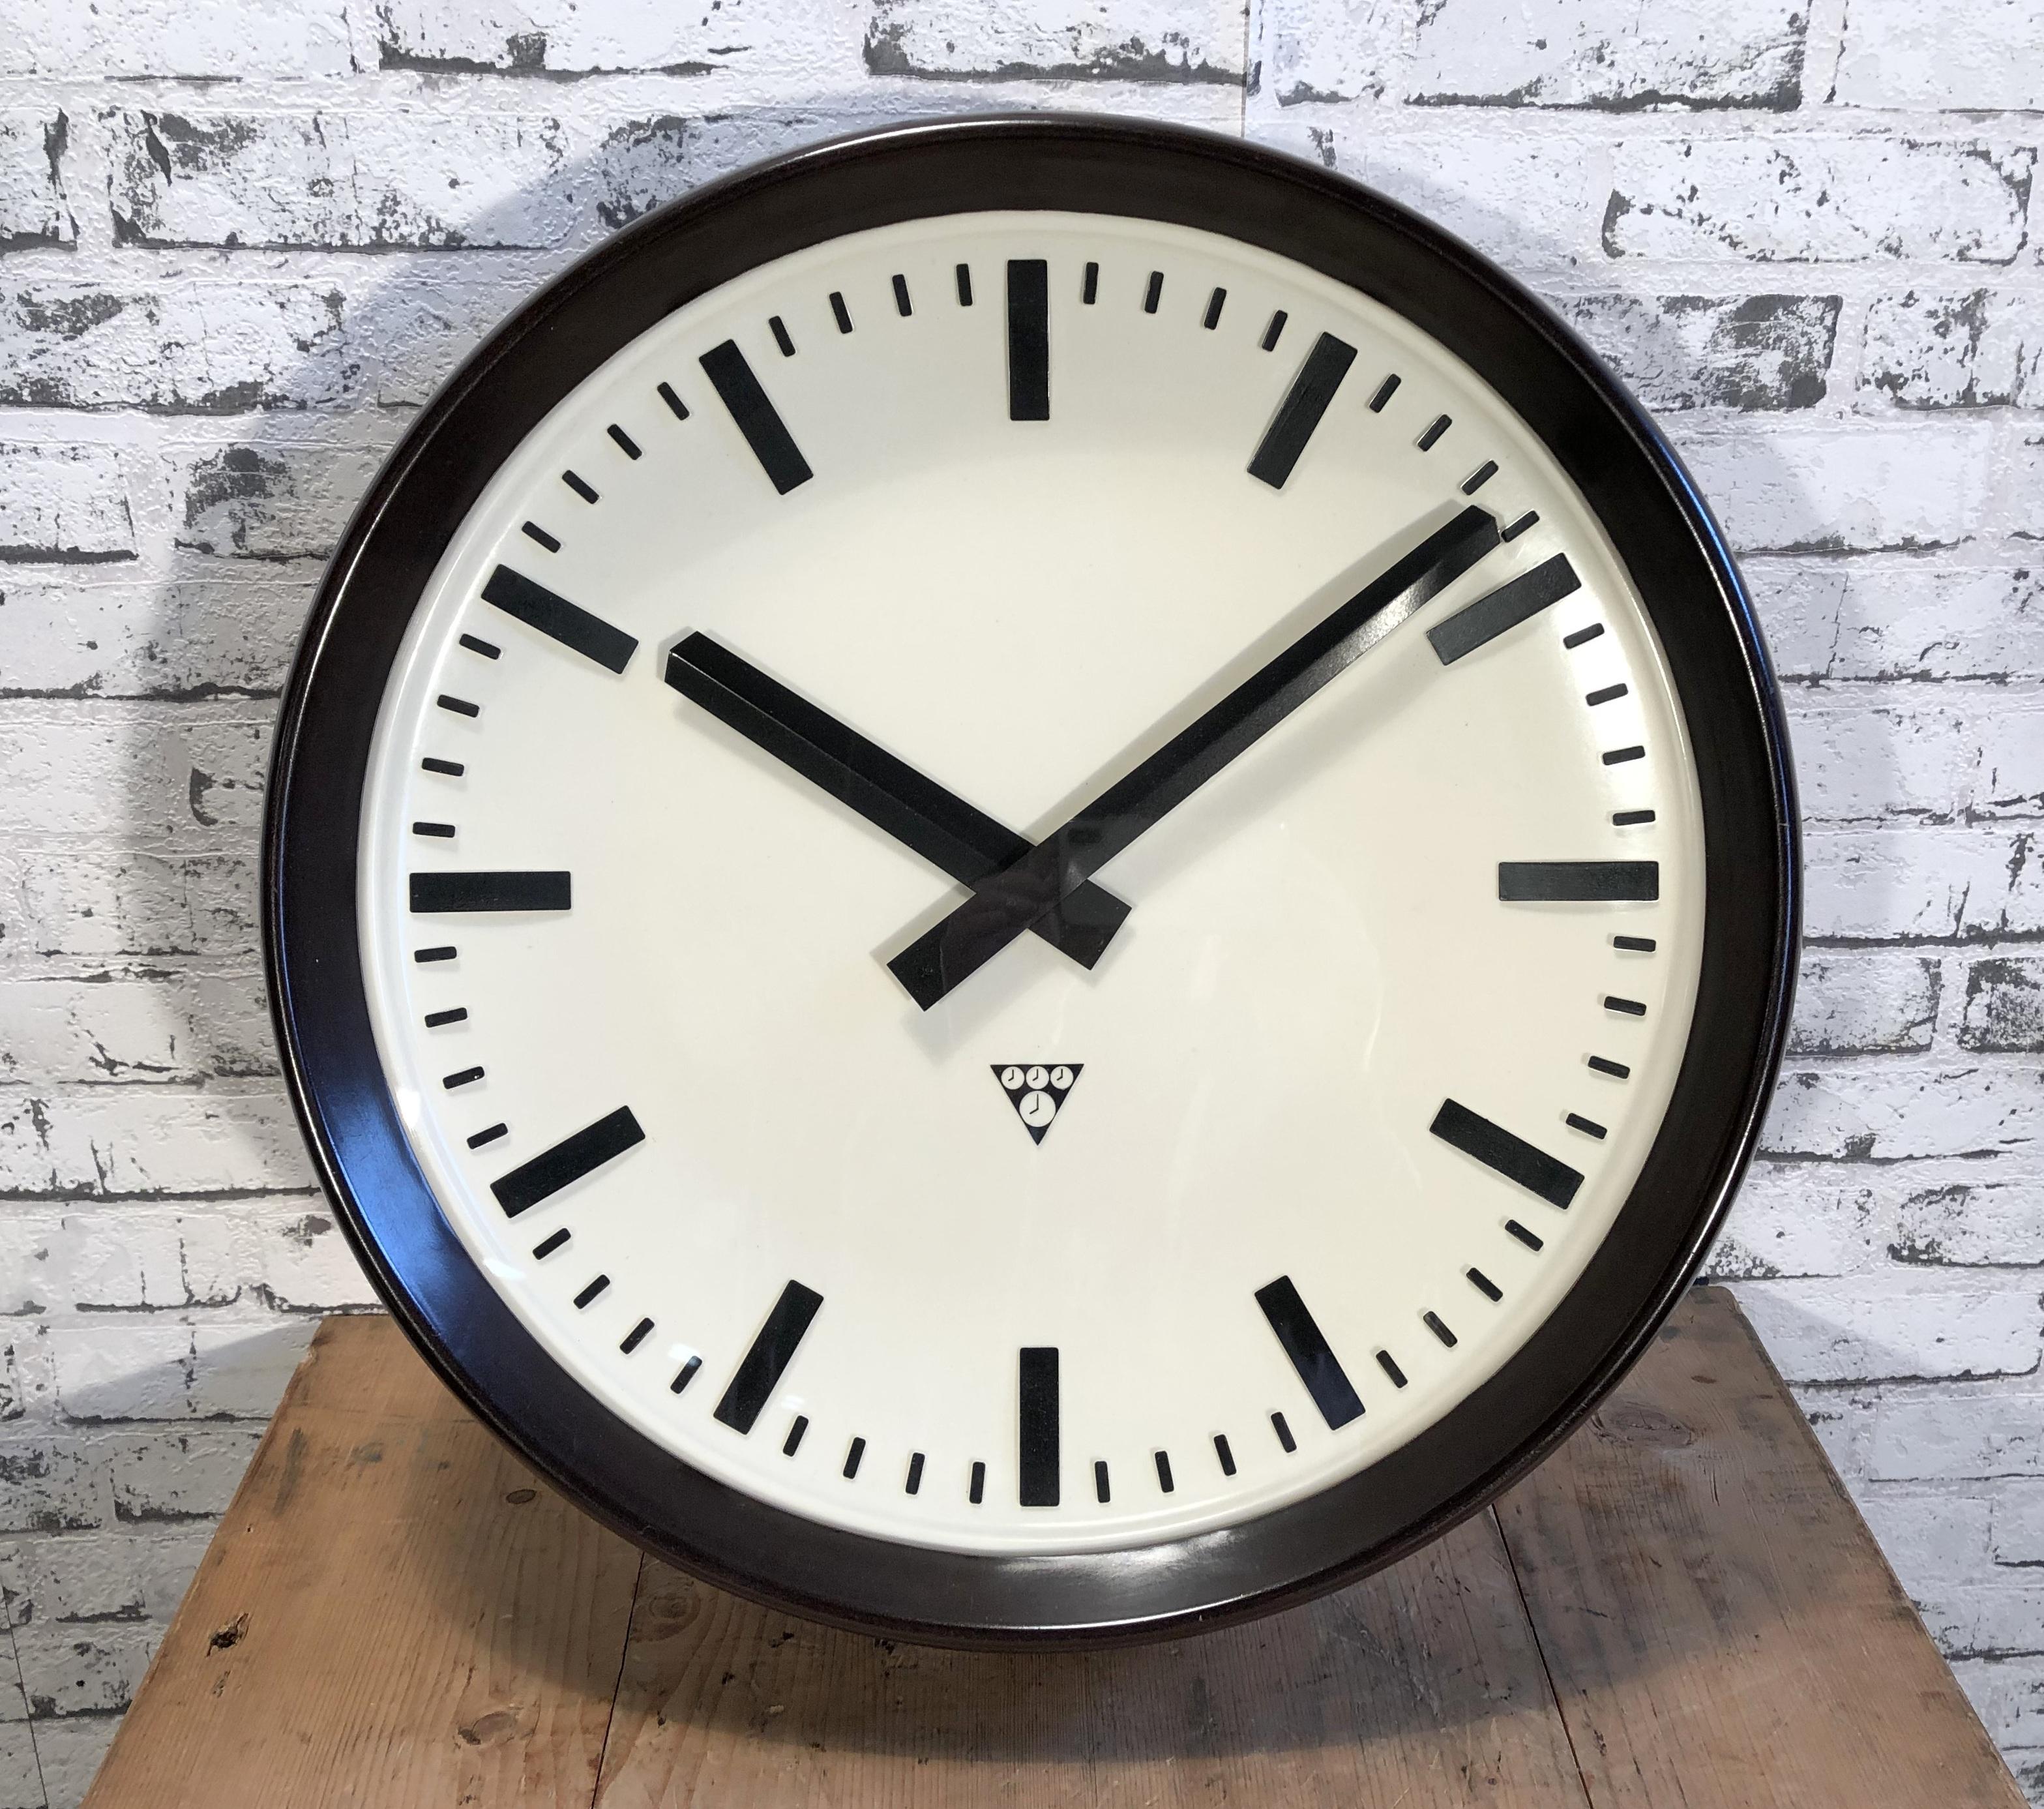 This large wall clock was produced by Pragotron in former Czechoslovakia during the 1960s.It features a brown bakelite frame, white plastic dial, aluminium hands and clear glass cover. The piece has been converted into a battery-powered clockwork